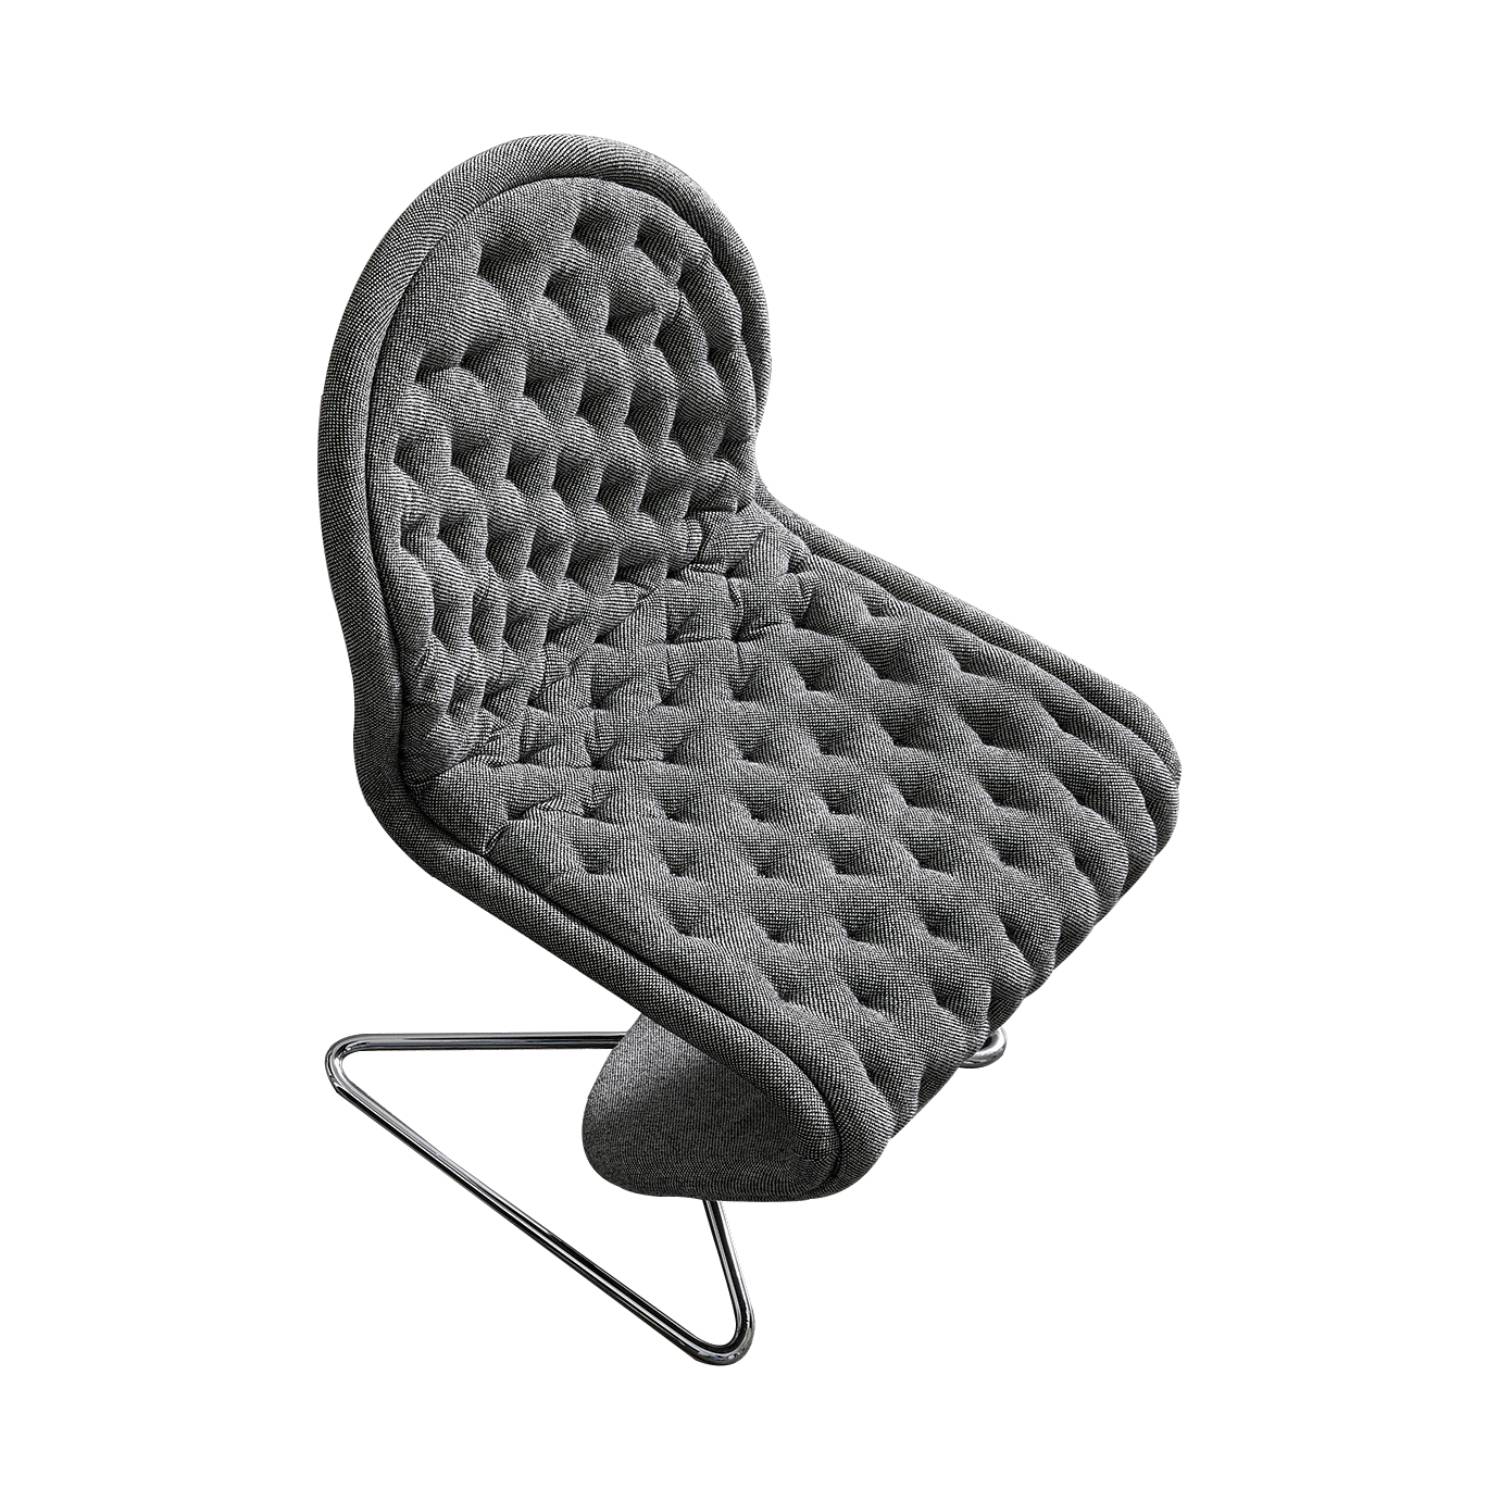 System 1-2-3 Dining Chair: Deluxe + Butterfly